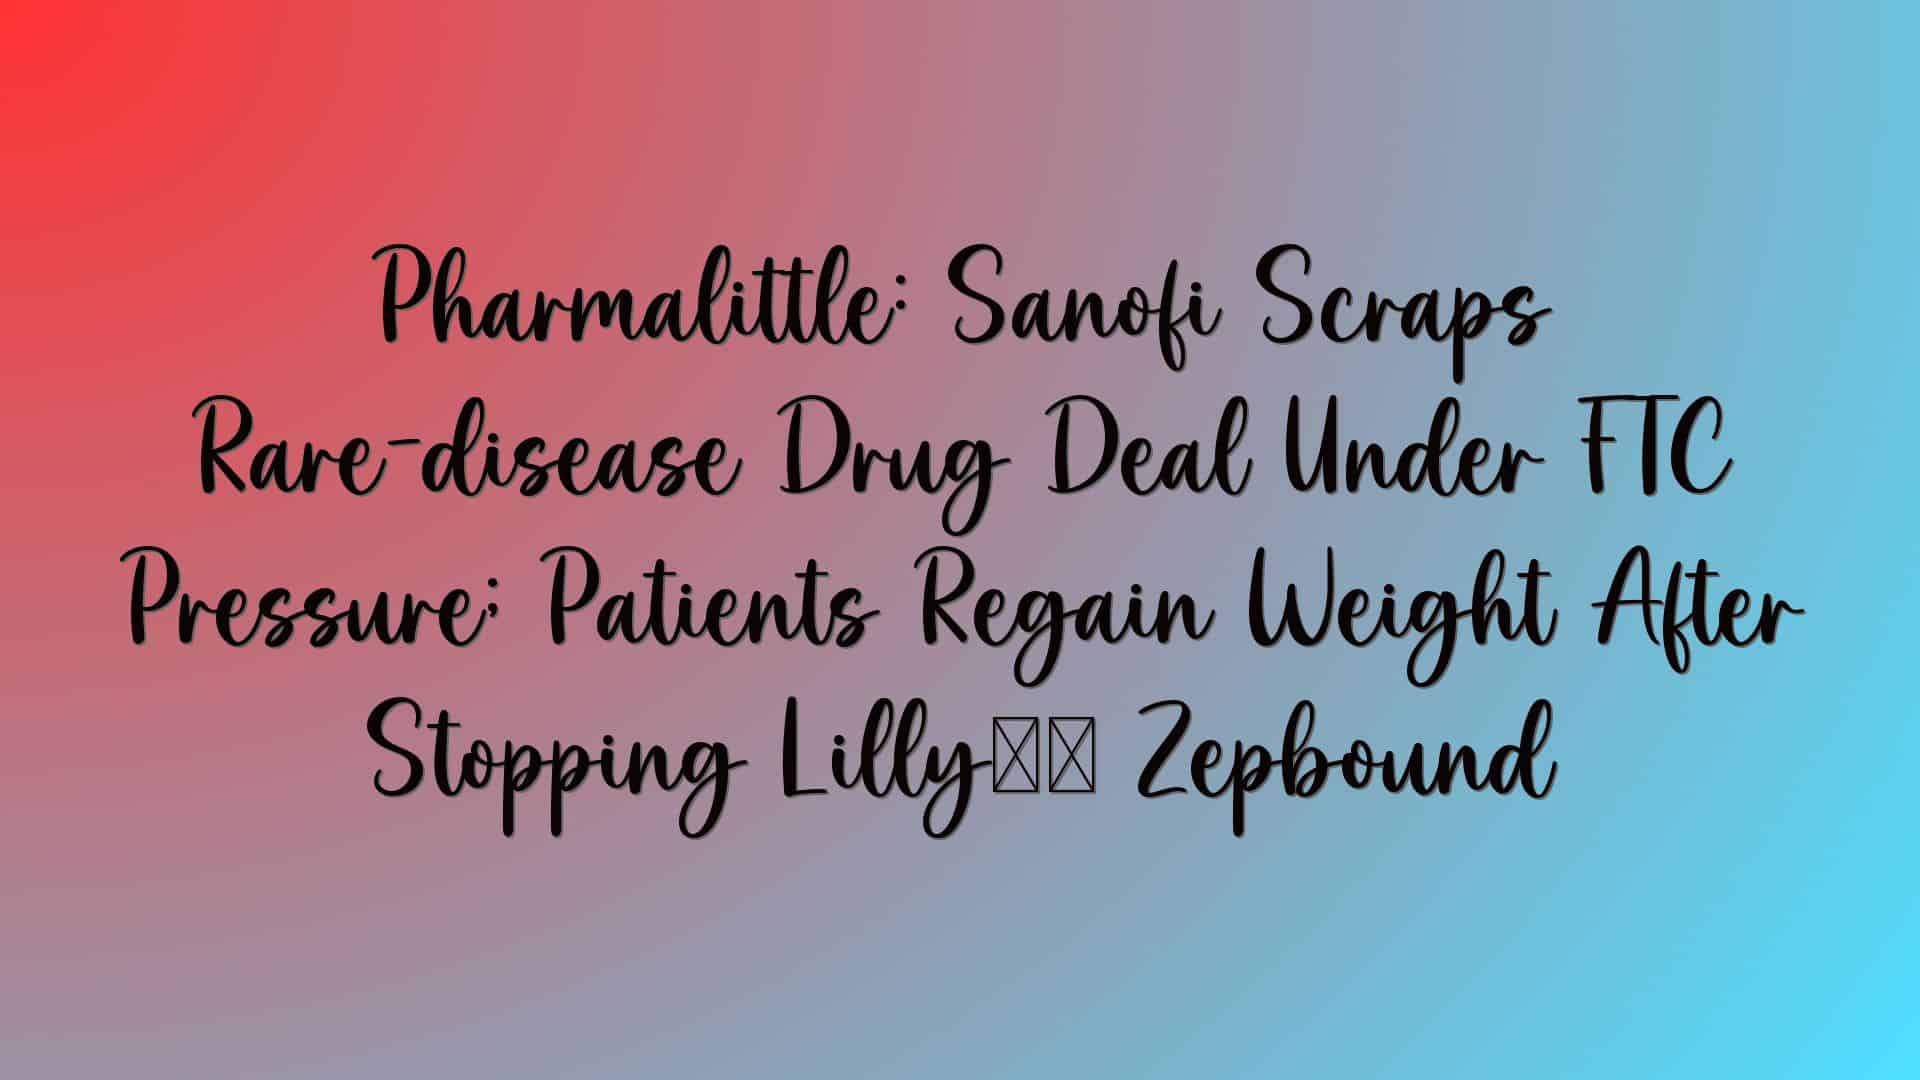 Pharmalittle: Sanofi Scraps Rare-disease Drug Deal Under FTC Pressure; Patients Regain Weight After Stopping Lilly’s Zepbound